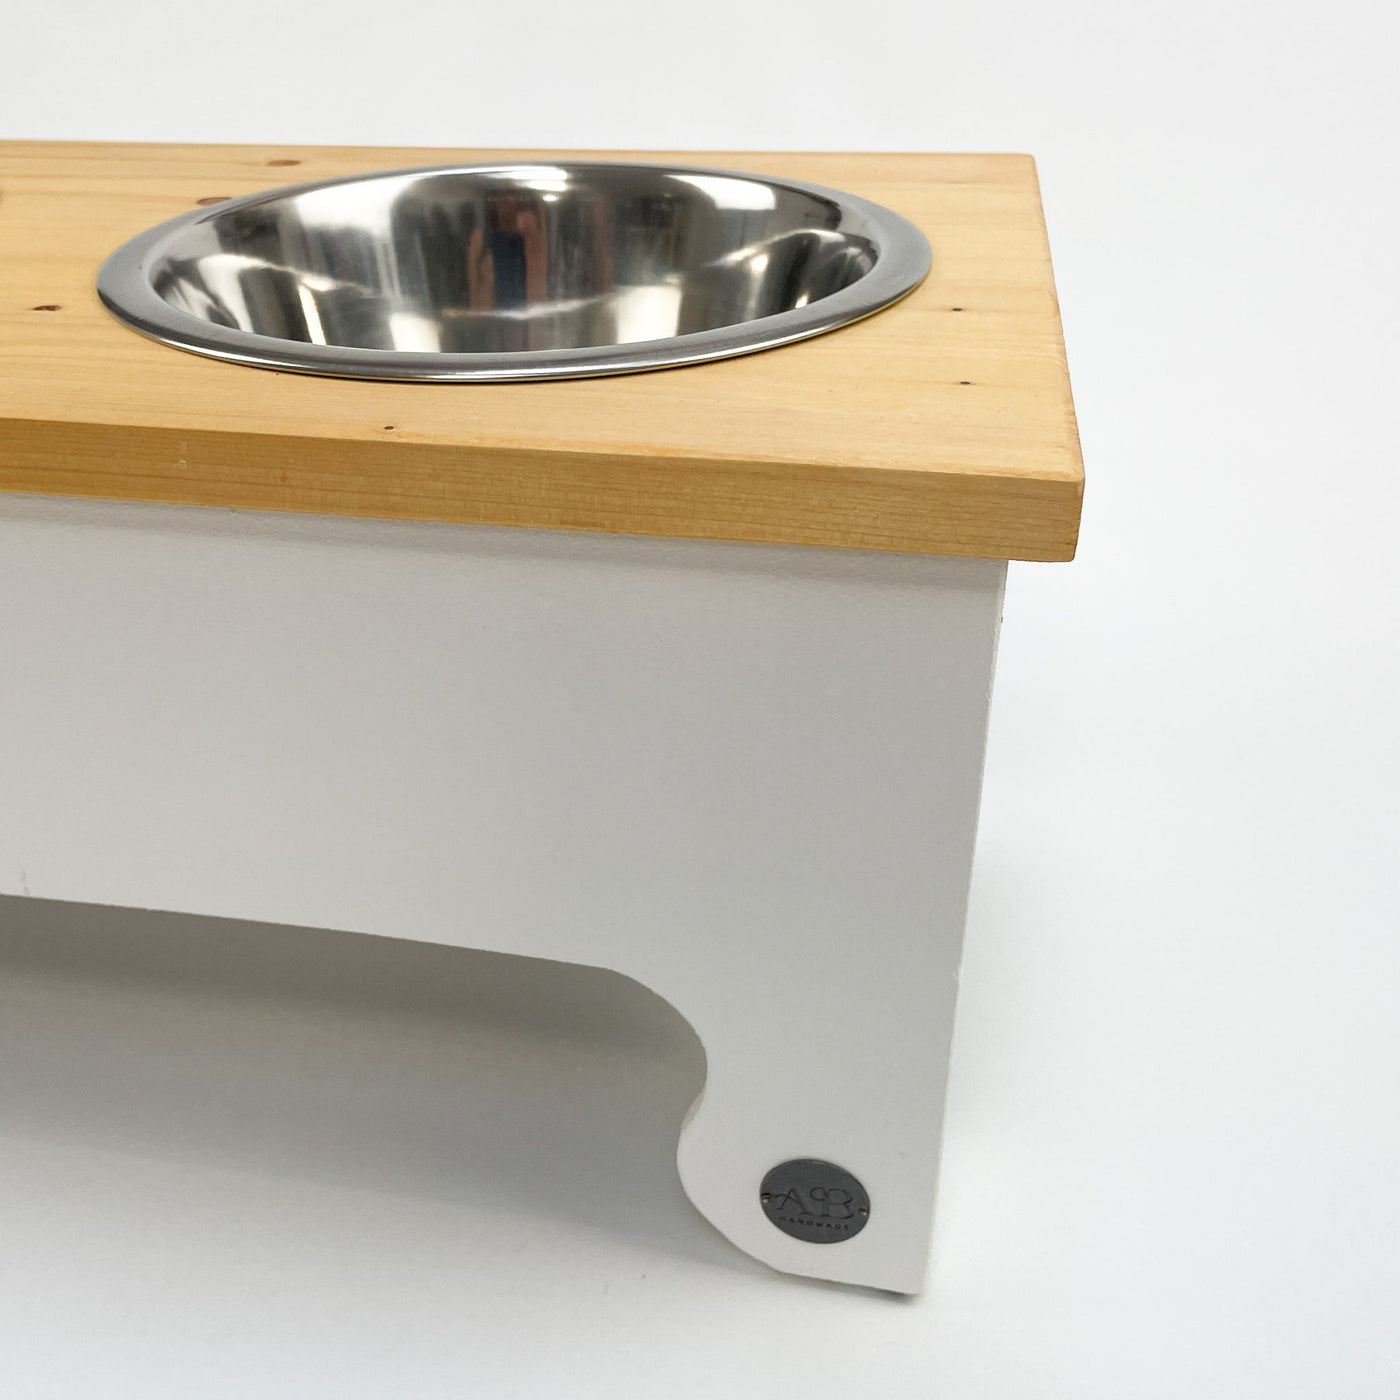 Pine Top Raised Bowl Feeding Stand in white.